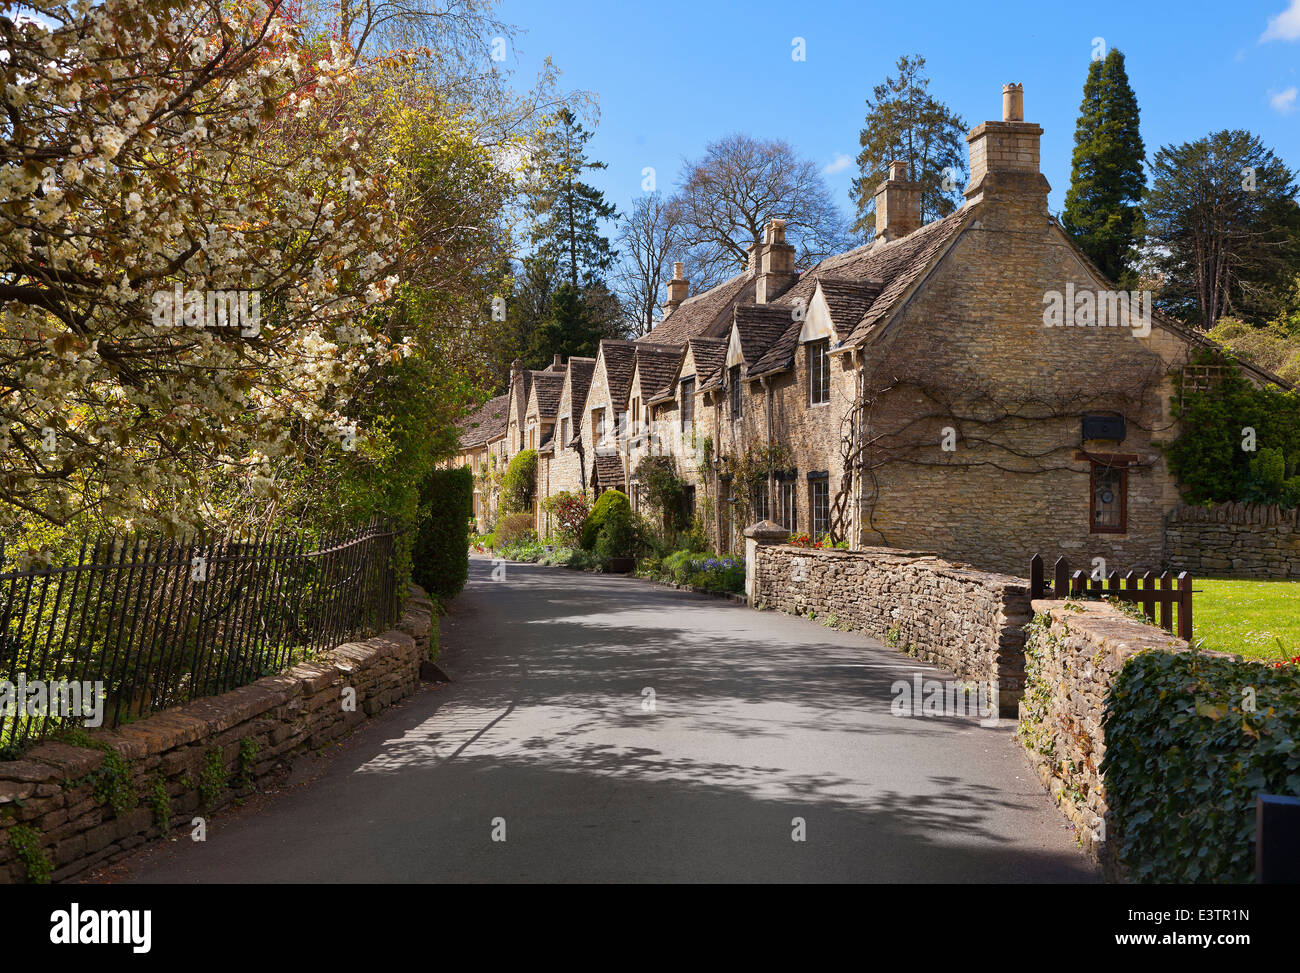 Castle Combe, Wiltshire, general street view of Cotswold stone cottages, bright sun Stock Photo